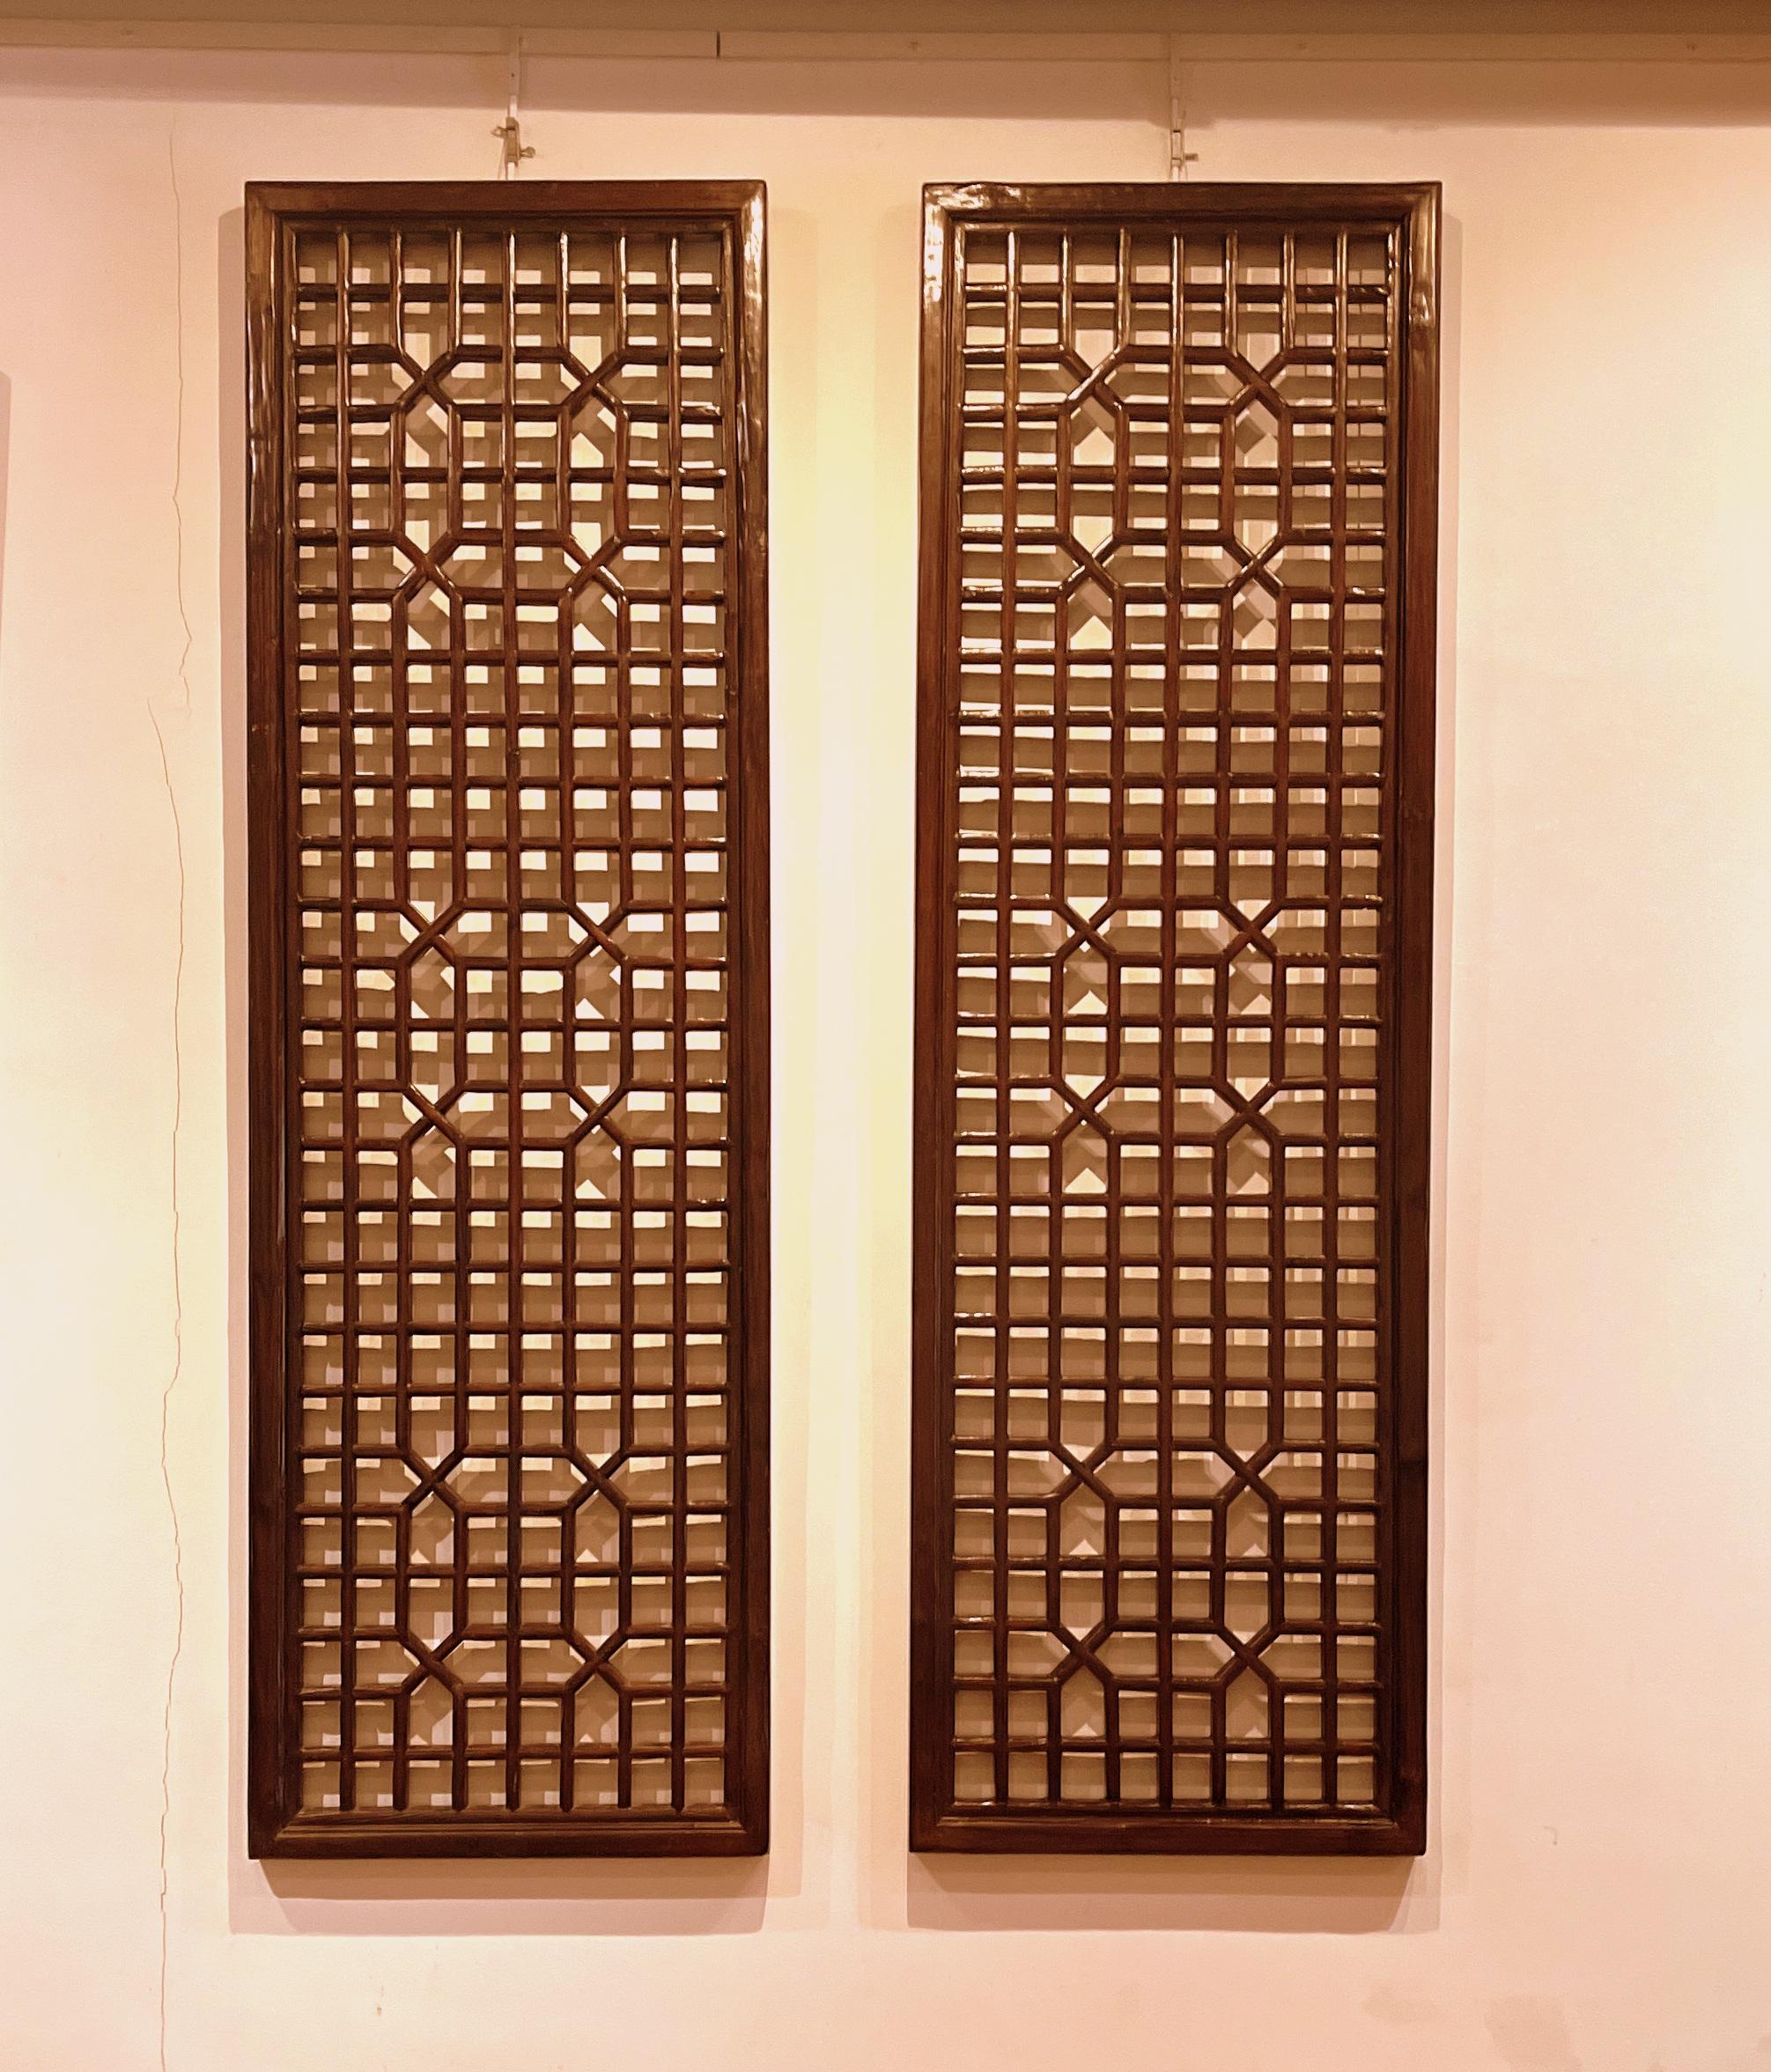 Pair of Asian window panels with geometric shapes design.
All constructed with joinery techniques.